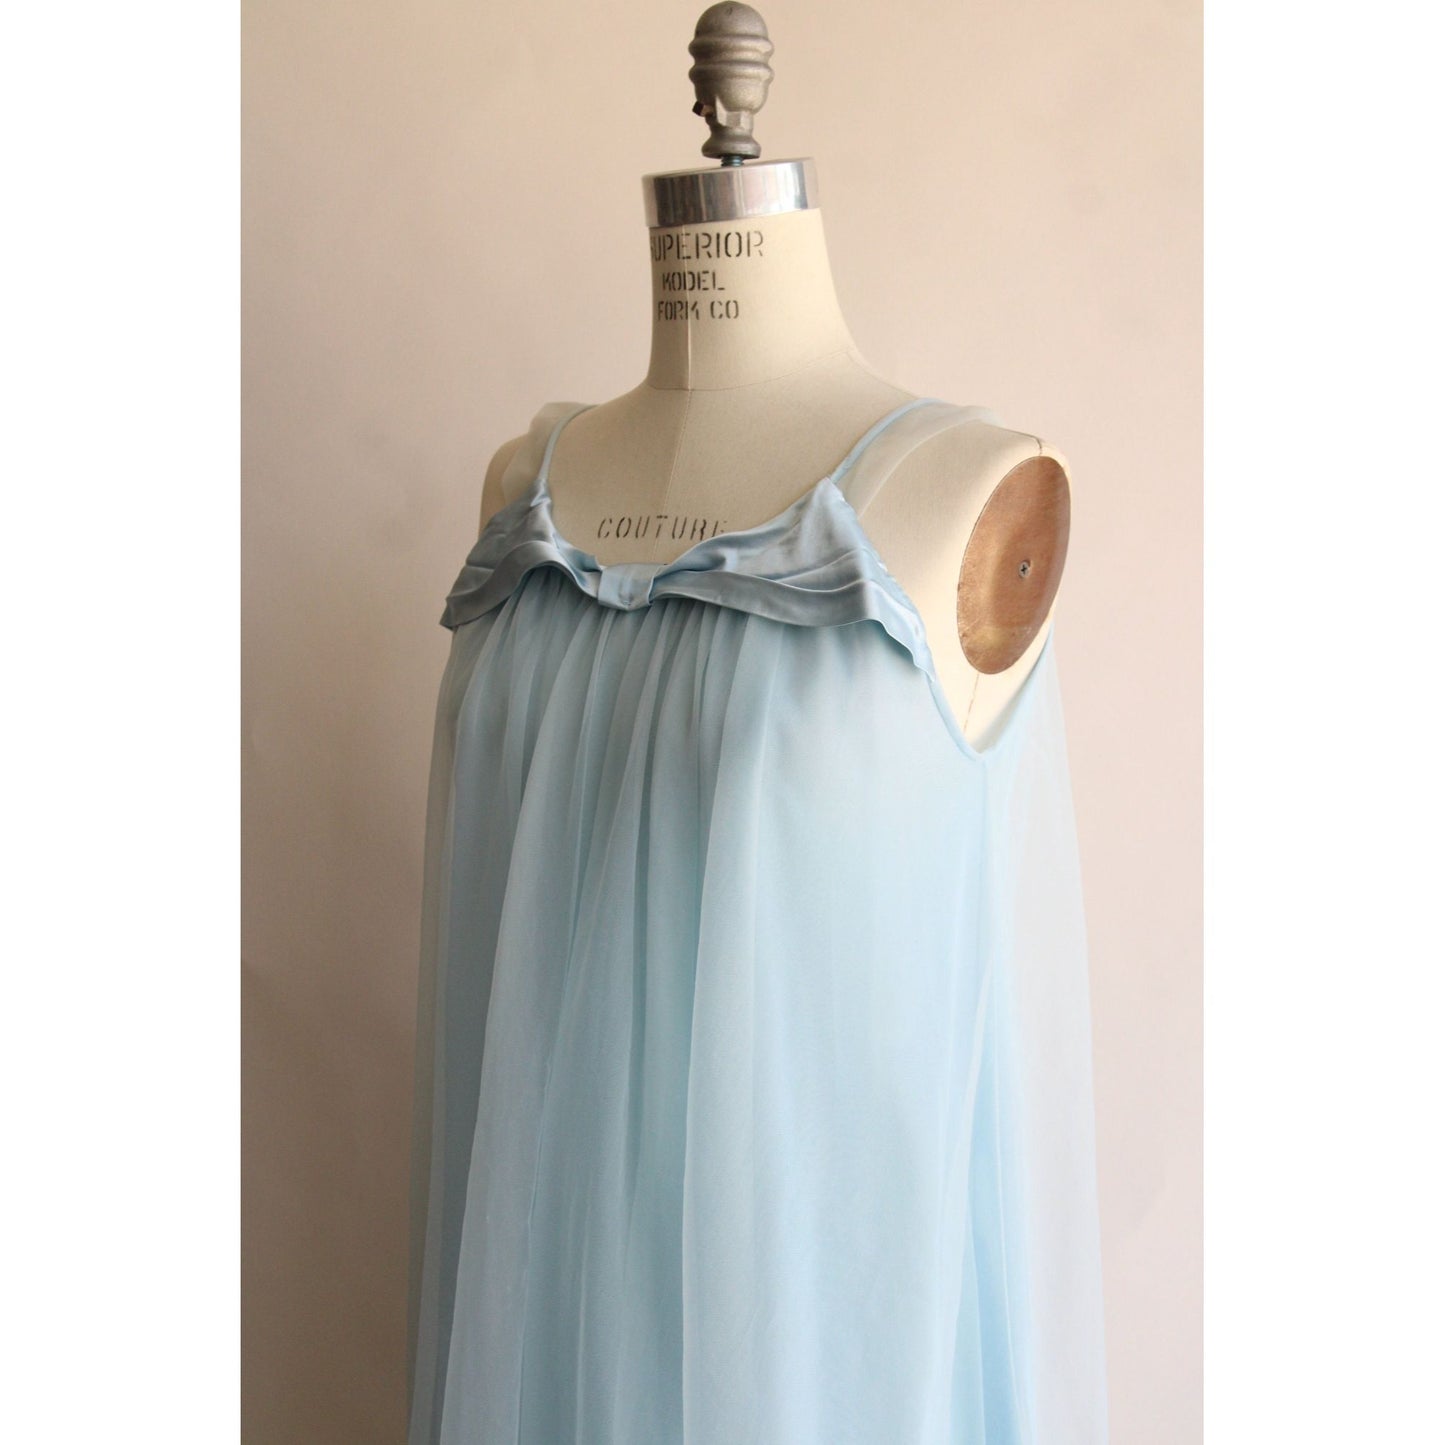 Vintage 1960s Nightgown Blue Babydoll Nightgown